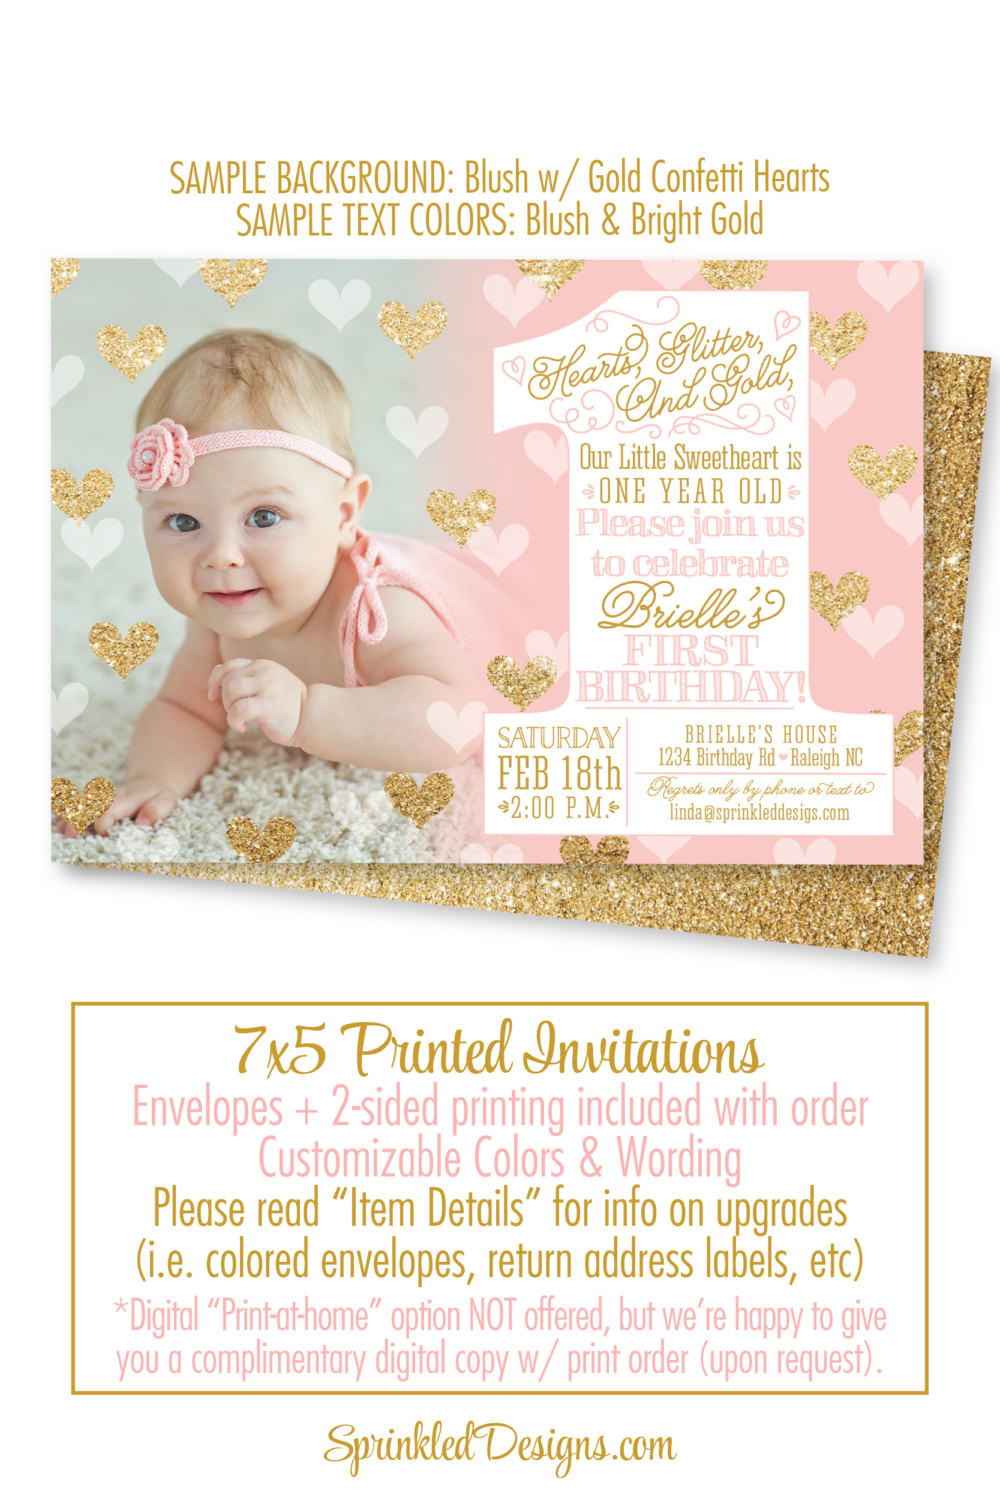 1 Year Old Birthday Invitations
 Our Little Sweetheart 1st Birthday Invitation e Year Old